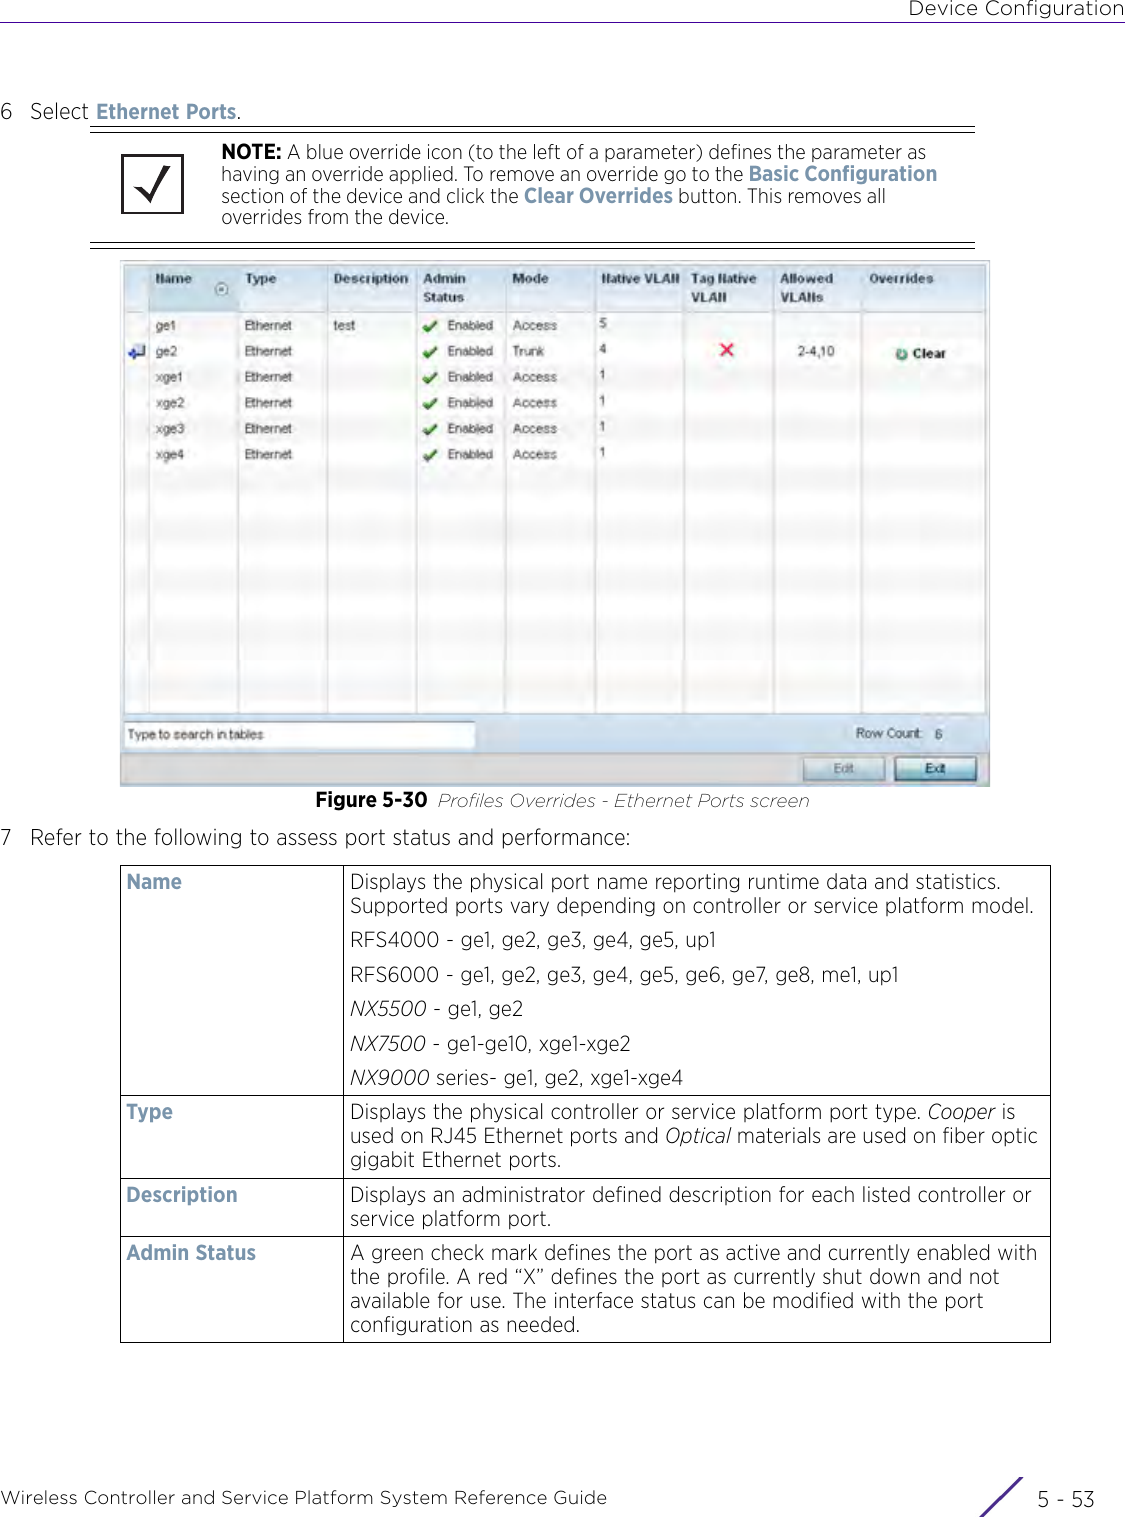 Device ConfigurationWireless Controller and Service Platform System Reference Guide 5 - 536Select Ethernet Ports.Figure 5-30 Profiles Overrides - Ethernet Ports screen7 Refer to the following to assess port status and performance:NOTE: A blue override icon (to the left of a parameter) defines the parameter as having an override applied. To remove an override go to the Basic Configuration section of the device and click the Clear Overrides button. This removes all overrides from the device.Name Displays the physical port name reporting runtime data and statistics. Supported ports vary depending on controller or service platform model.RFS4000 - ge1, ge2, ge3, ge4, ge5, up1RFS6000 - ge1, ge2, ge3, ge4, ge5, ge6, ge7, ge8, me1, up1NX5500 - ge1, ge2NX7500 - ge1-ge10, xge1-xge2NX9000 series- ge1, ge2, xge1-xge4Type Displays the physical controller or service platform port type. Cooper is used on RJ45 Ethernet ports and Optical materials are used on fiber optic gigabit Ethernet ports.Description Displays an administrator defined description for each listed controller or service platform port. Admin Status A green check mark defines the port as active and currently enabled with the profile. A red “X” defines the port as currently shut down and not available for use. The interface status can be modified with the port configuration as needed. 